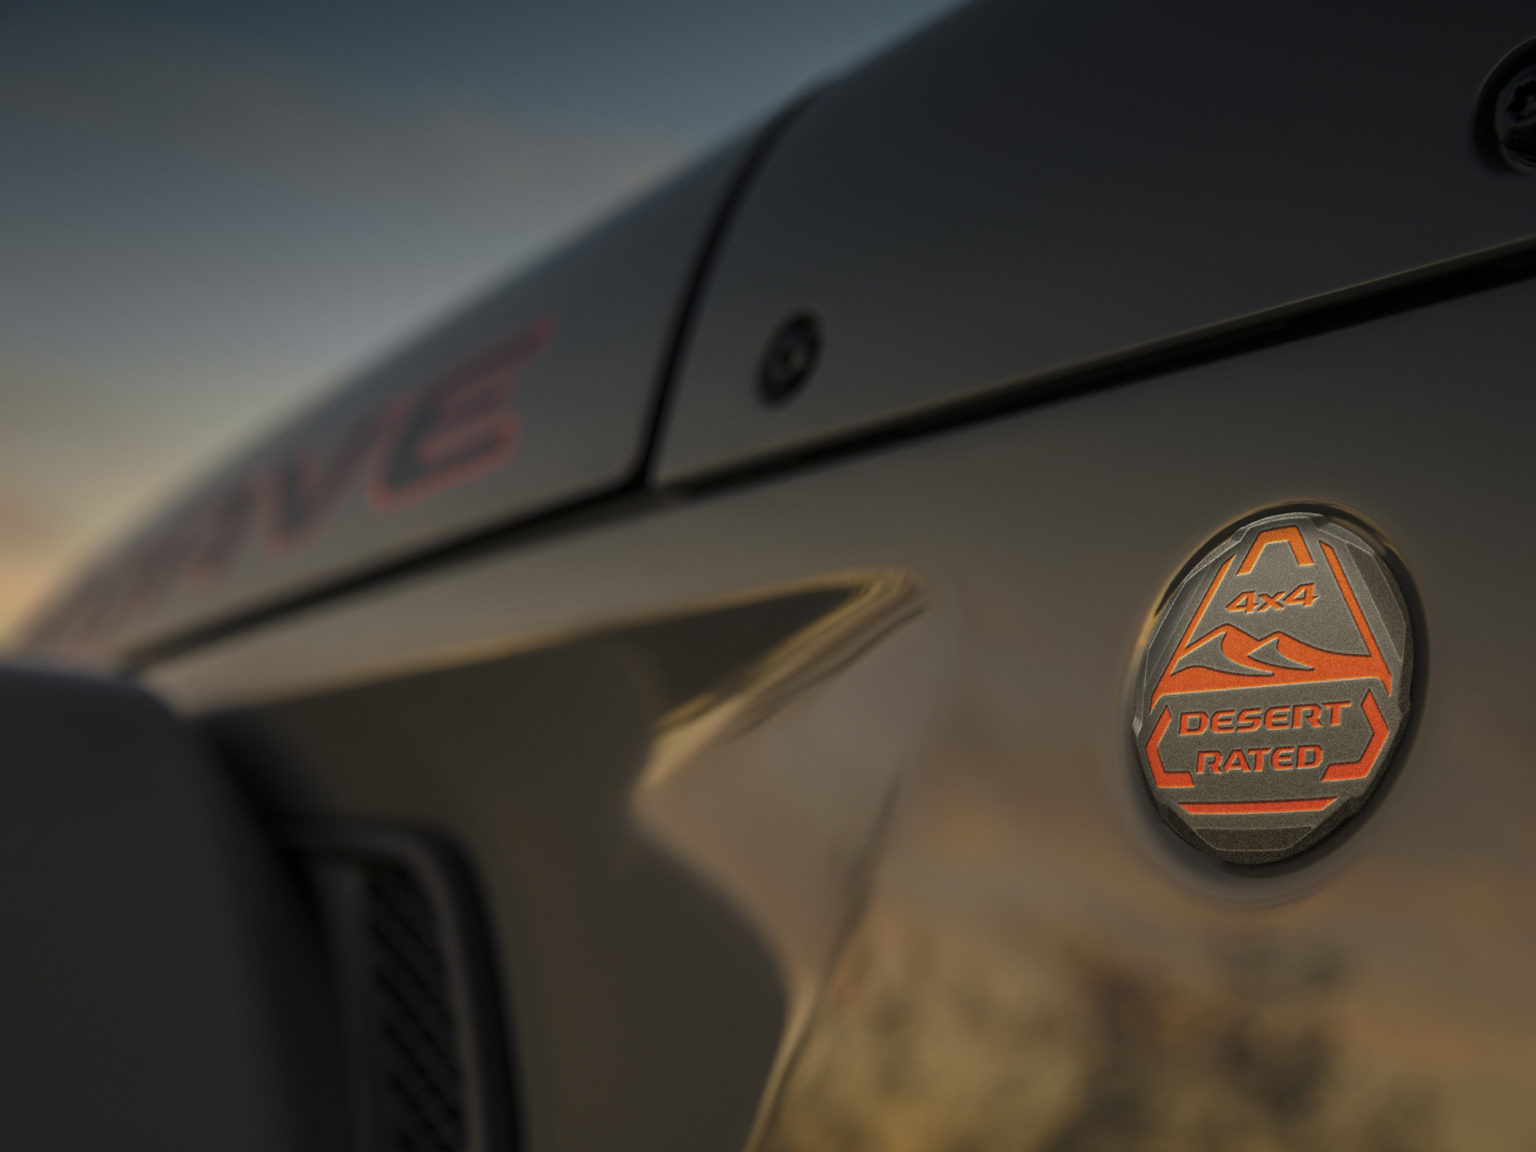 The Jeep Gladiator Mojave is the first model to wear the Desert Rated badge.